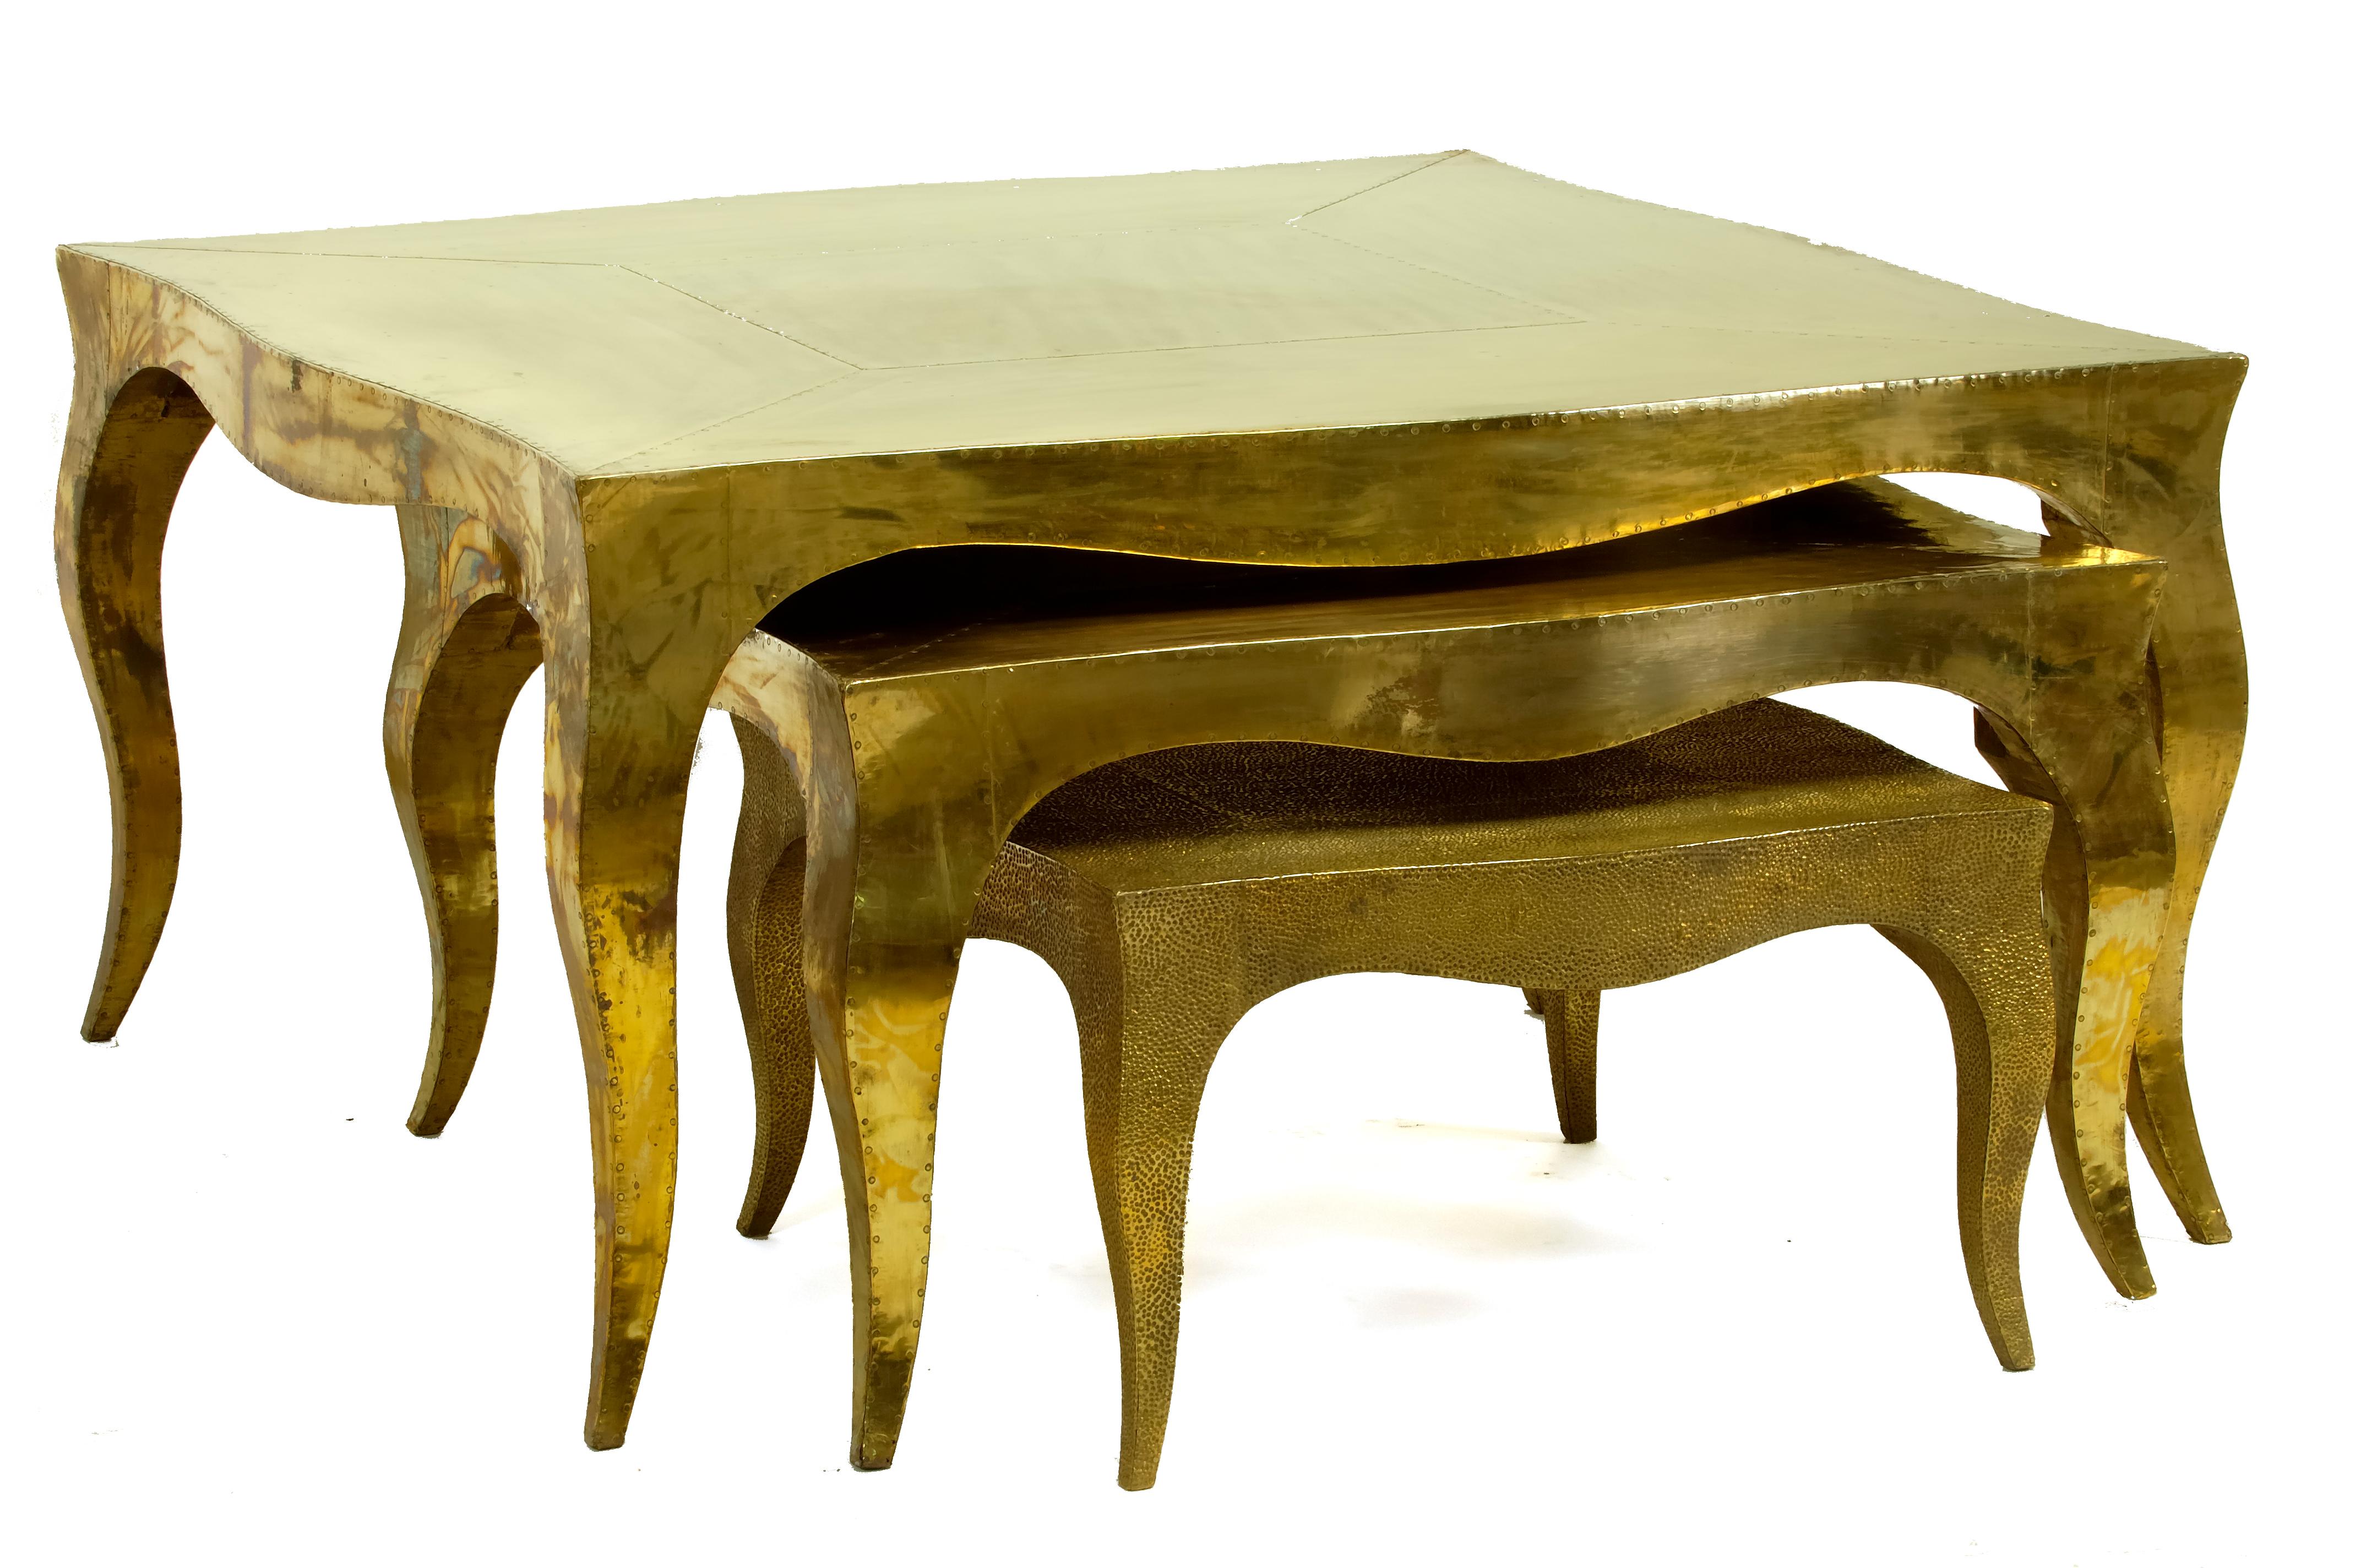 Louise Art Deco Industrial and Work Tables Mid. Hammered Copper by Paul Mathieu For Sale 3